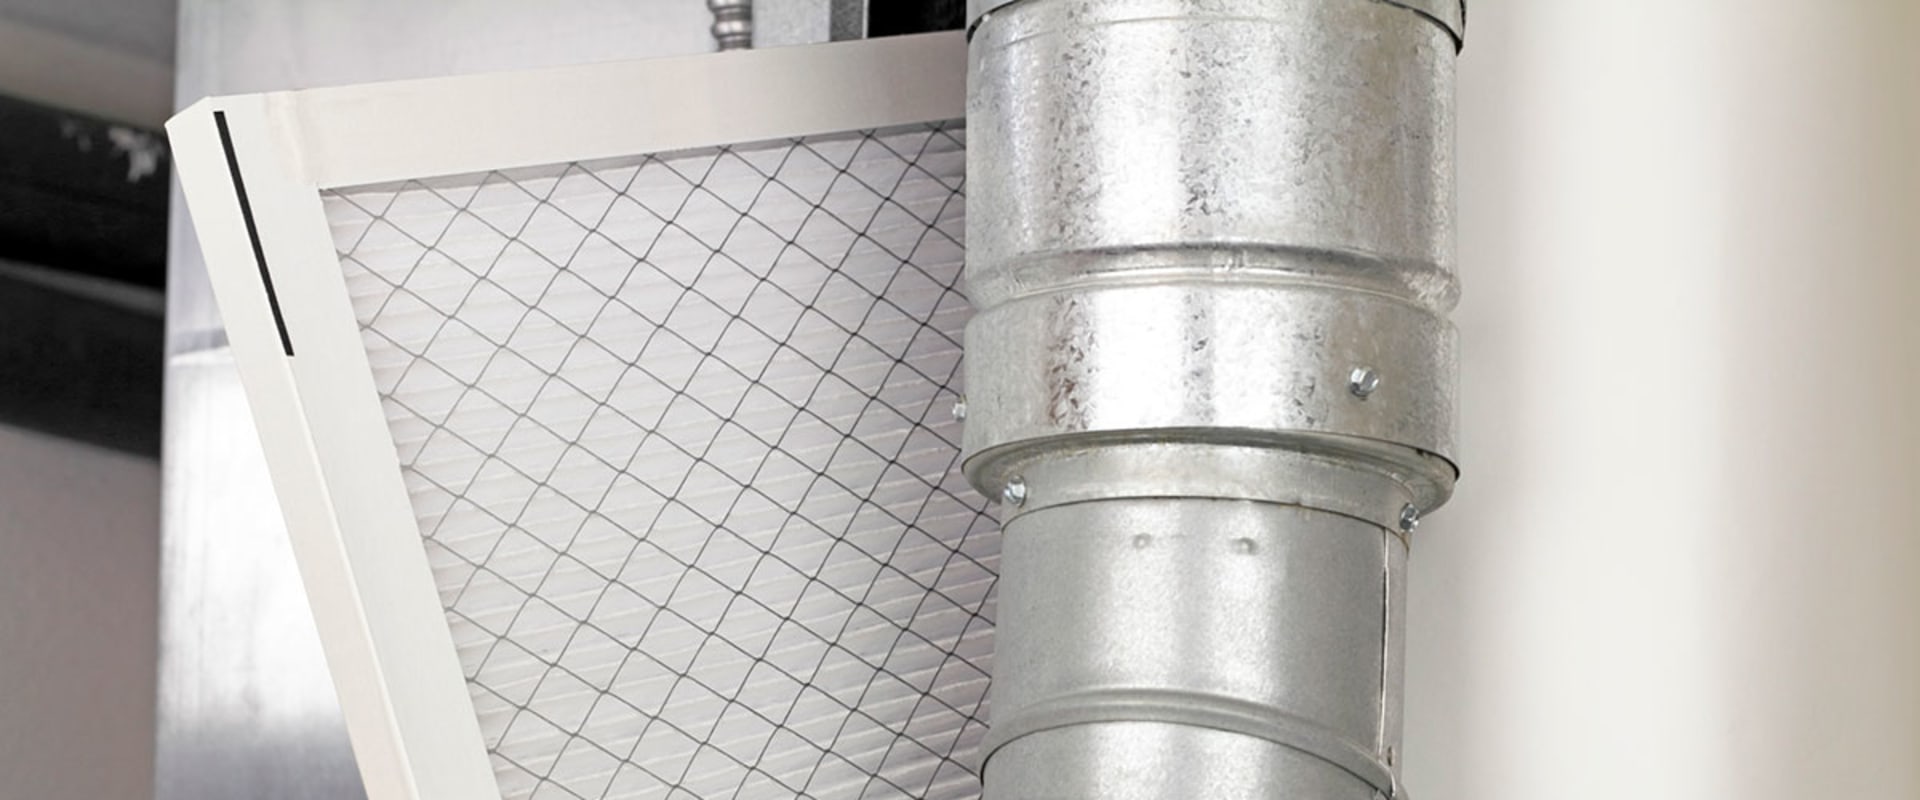 Everything You Need to Know About Air Filters